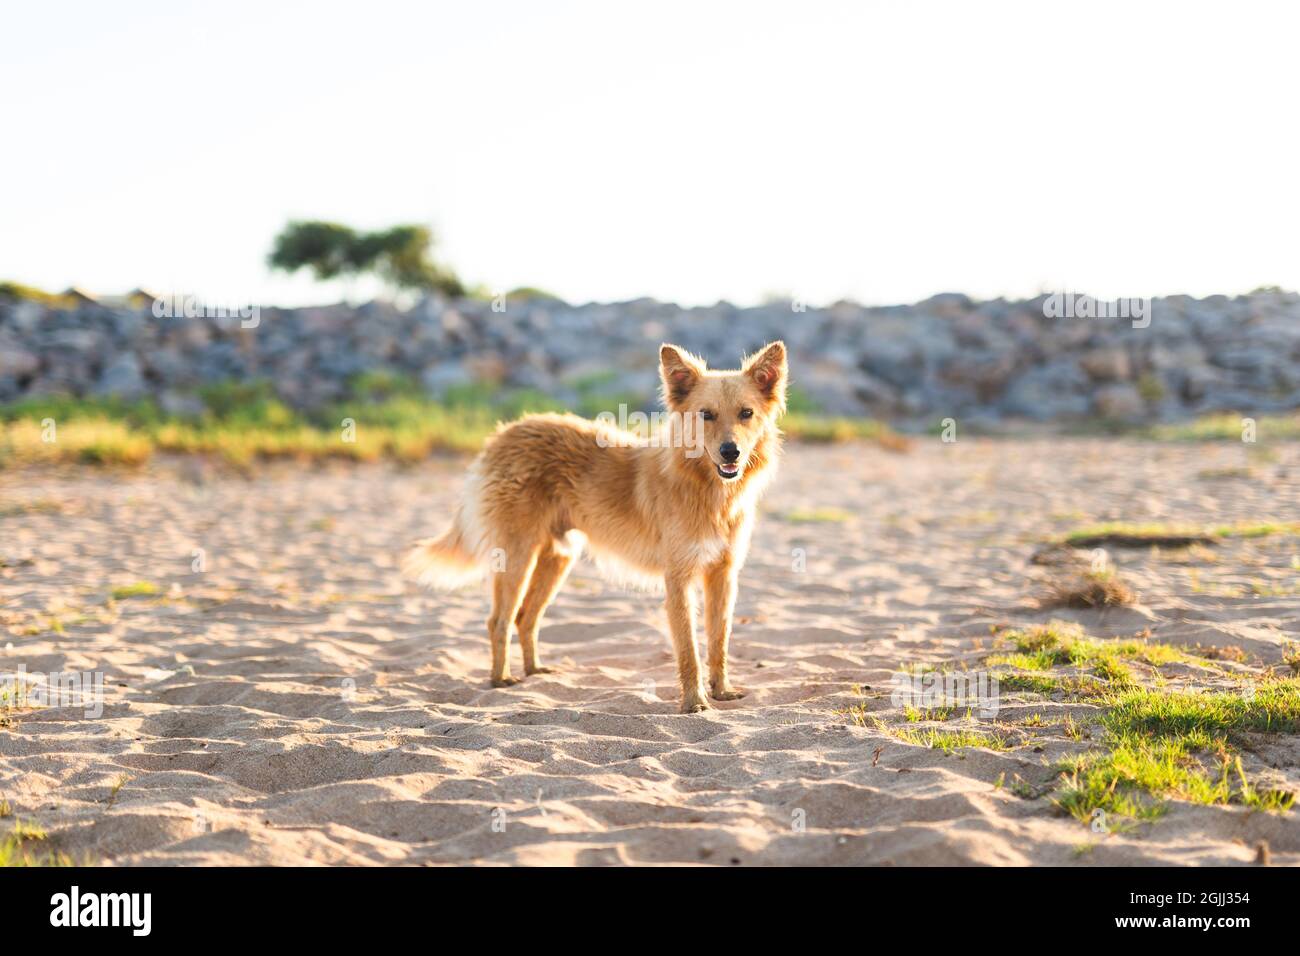 a stray dog standing on the sand looking at the camera - animal protection Stock Photo